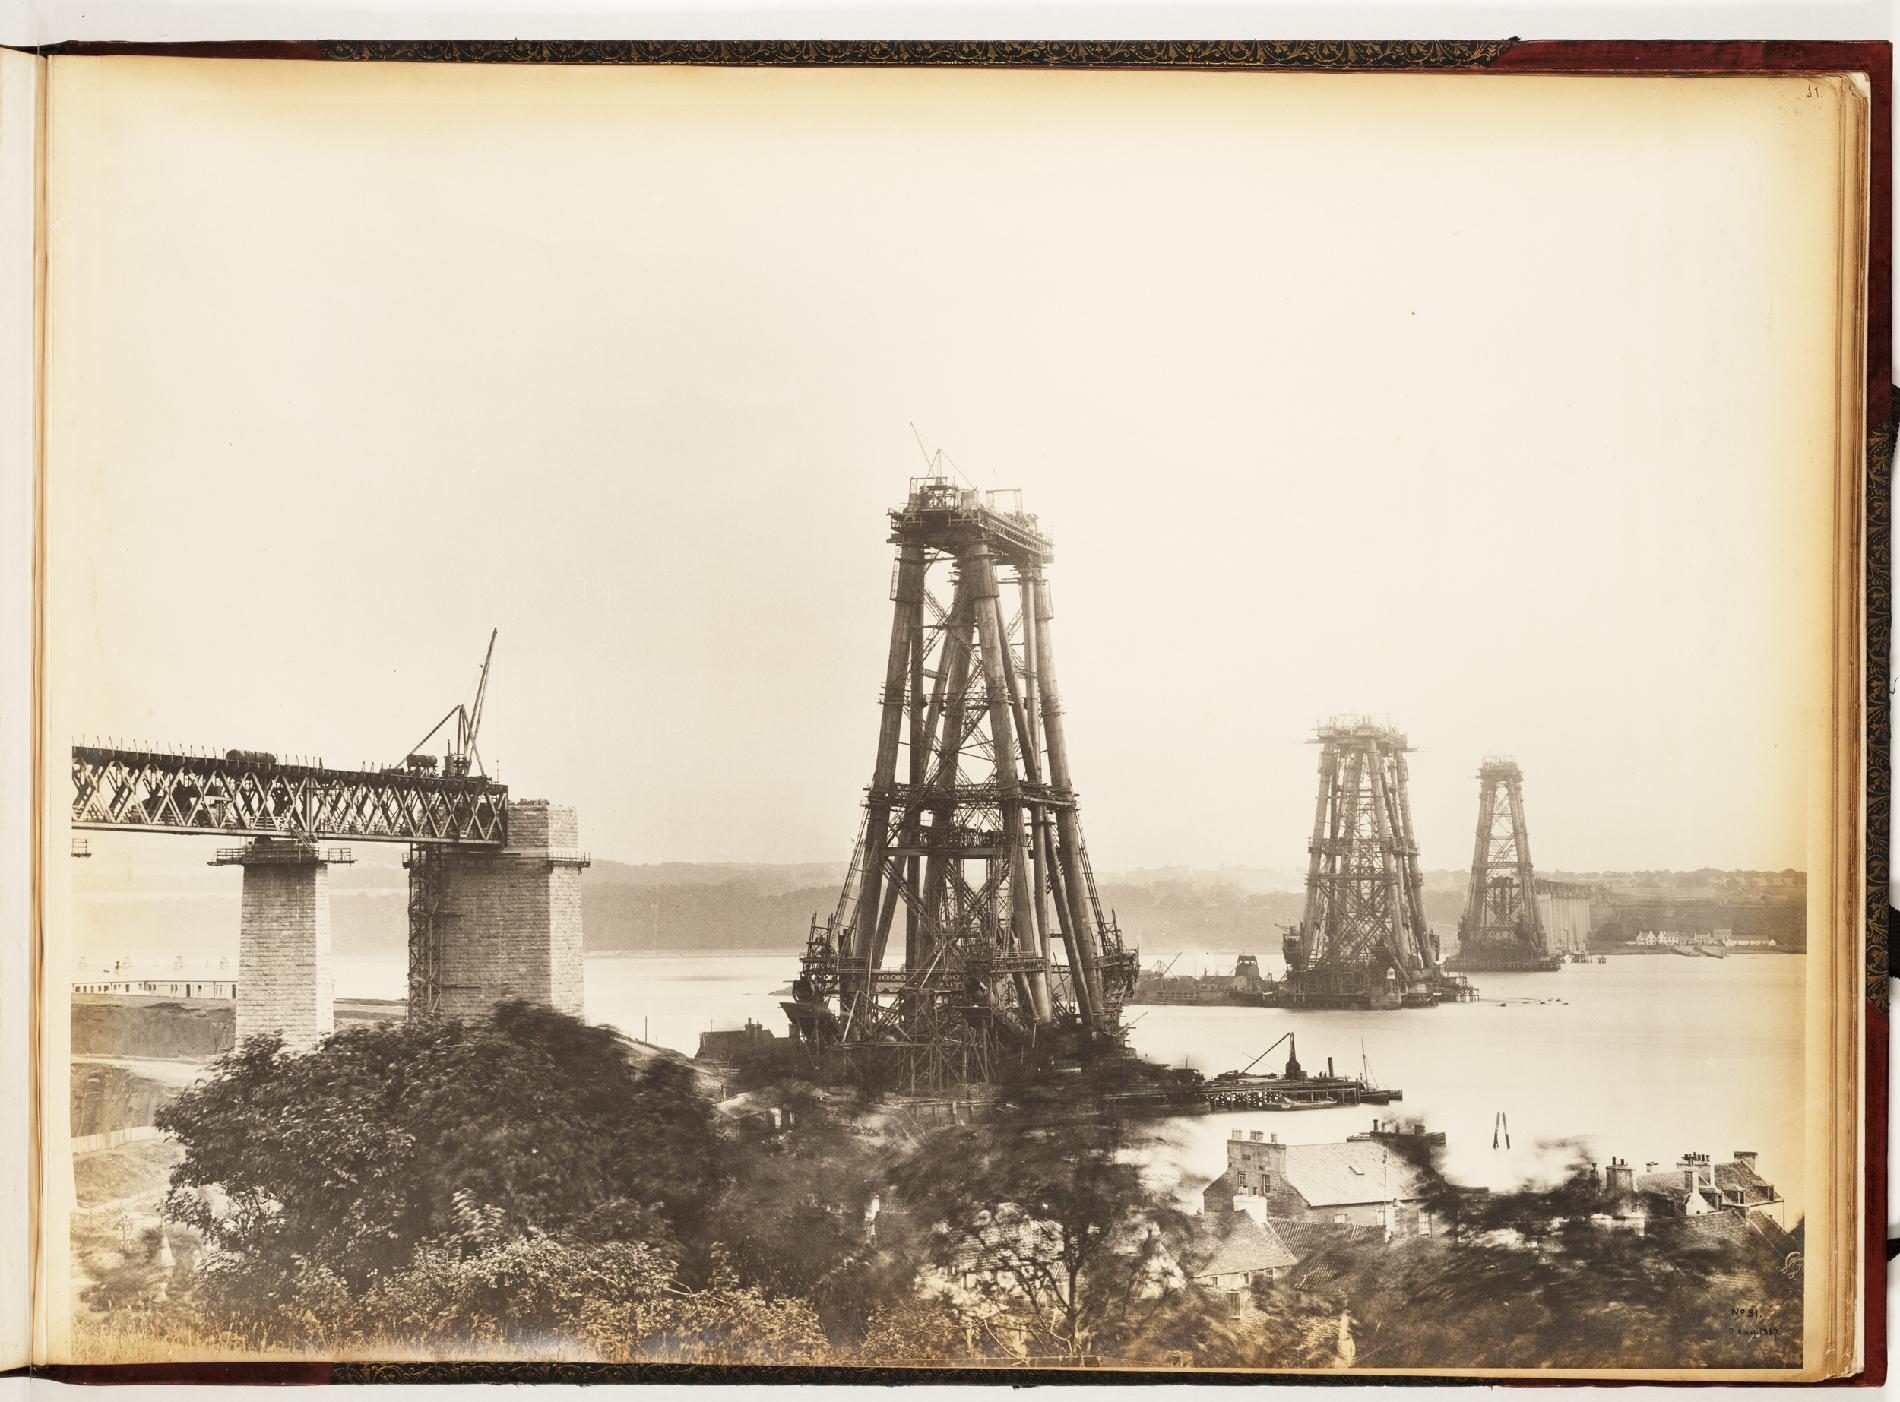 A sepia-toned photograph of a partially constructed bridge, with three cantilevers visible above the water.